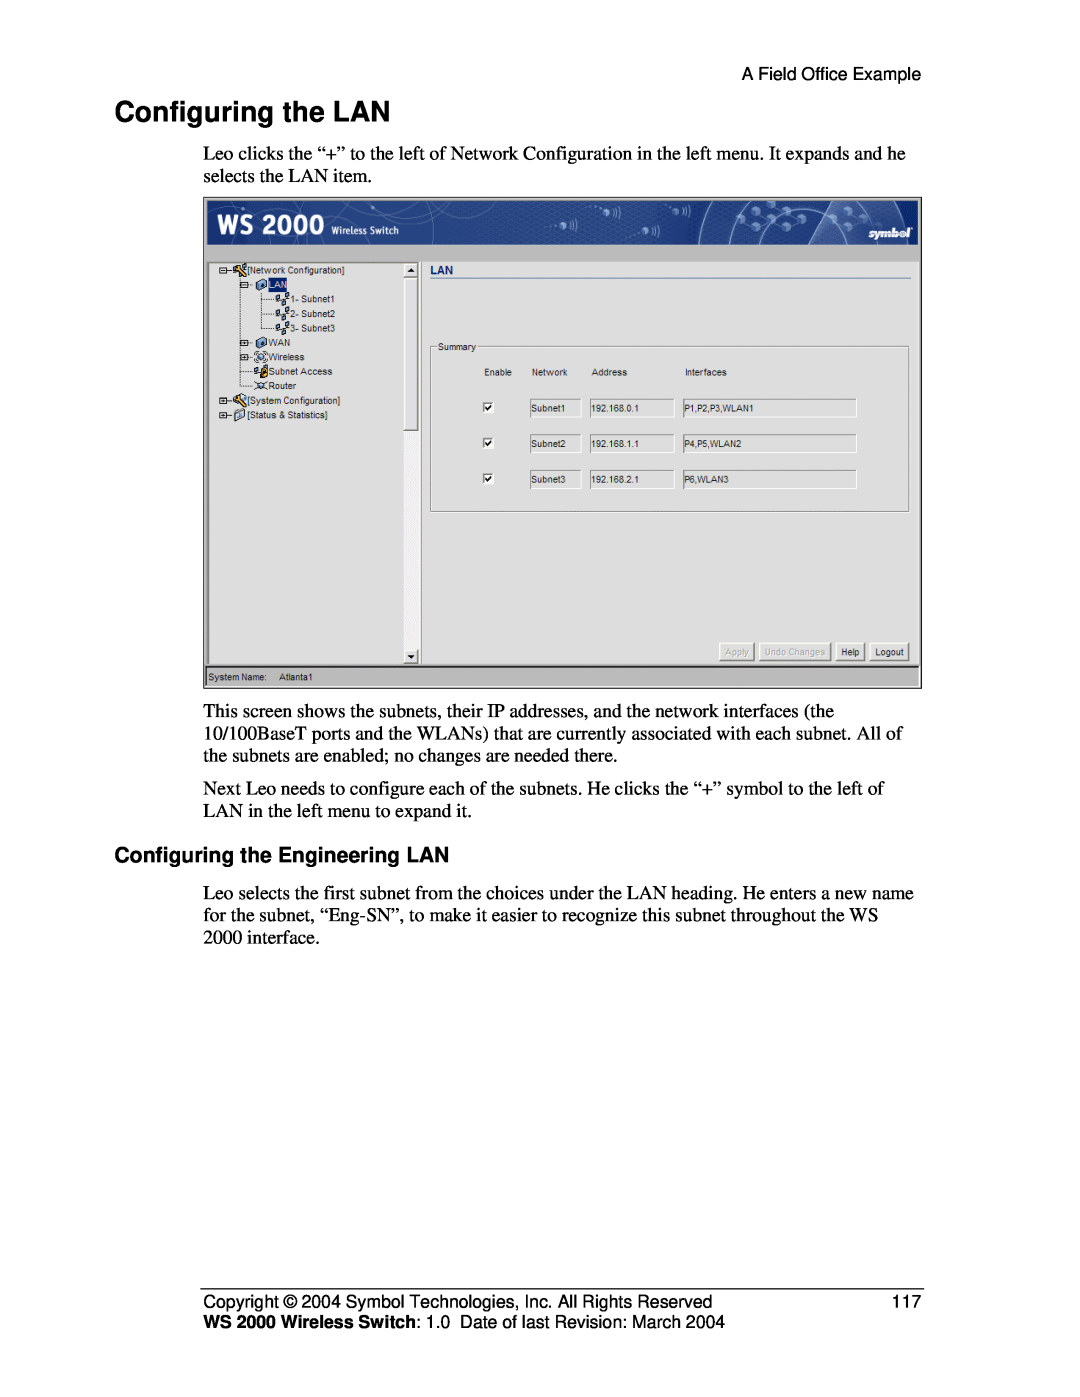 Symbol Technologies WS 2000 manual Configuring the LAN, Configuring the Engineering LAN 